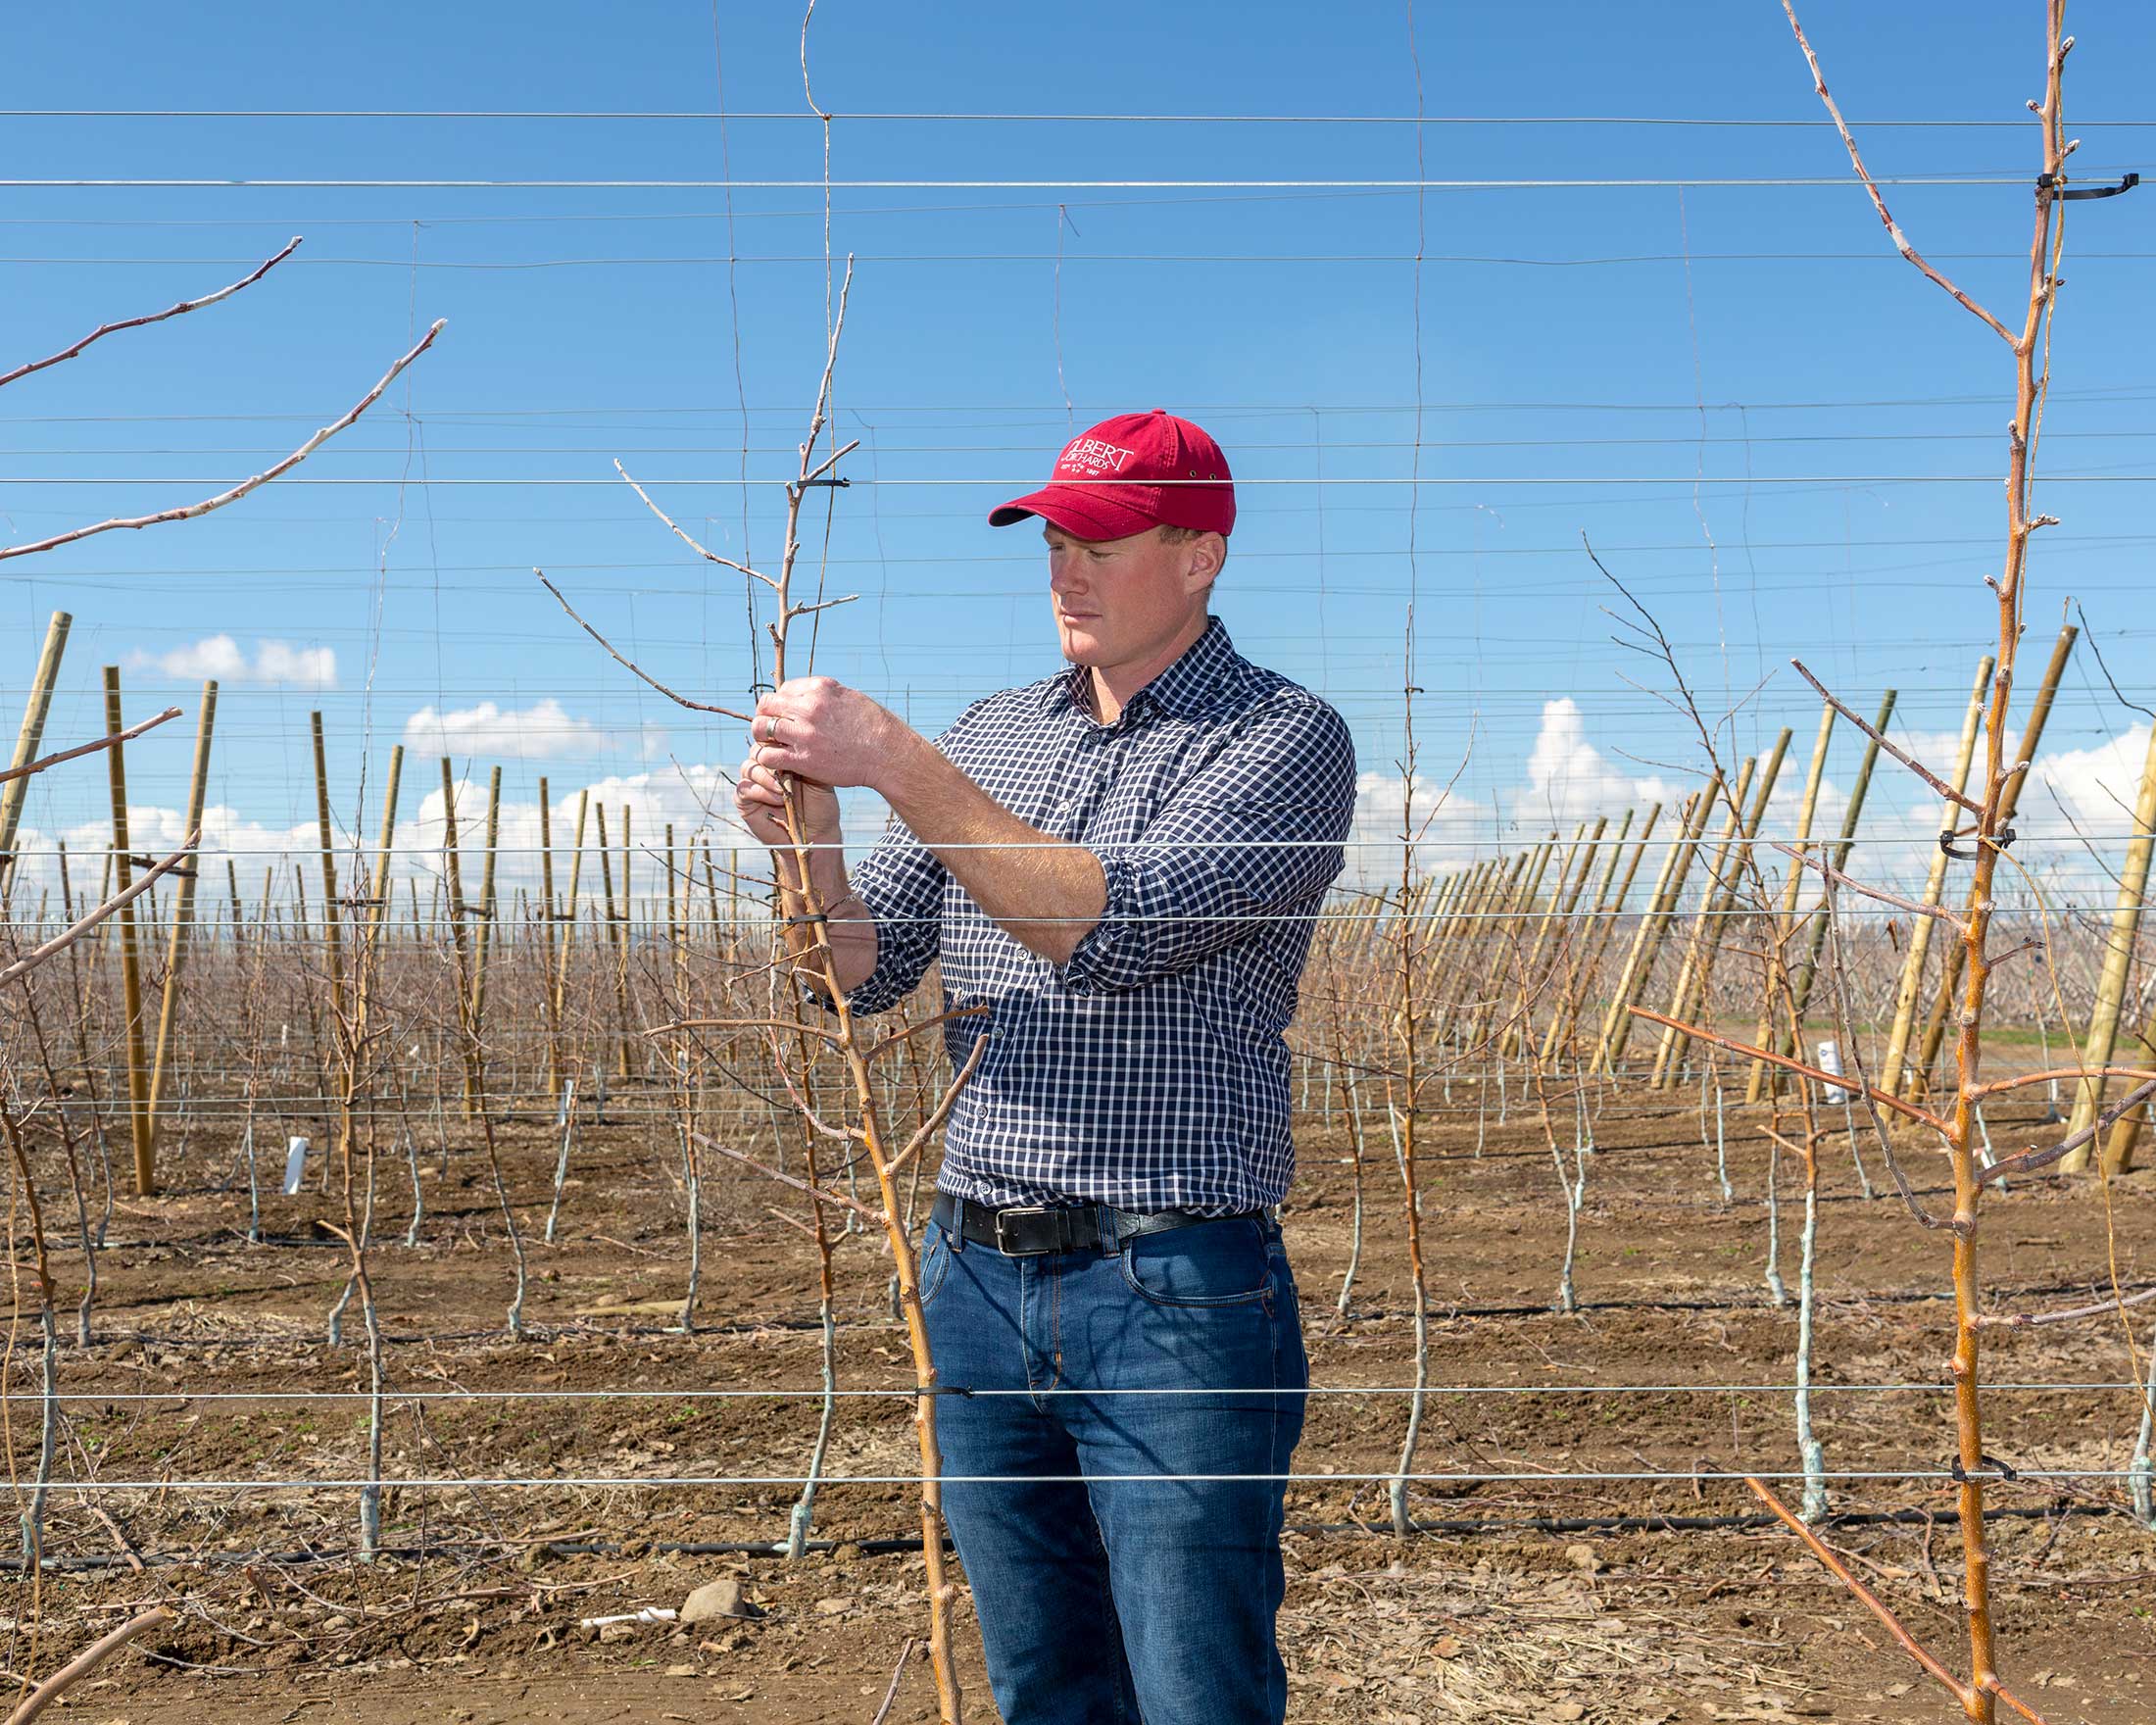 Sean Gilbert inspects a Cosmic Crisp tree on his orchard in Yakima, Wash.